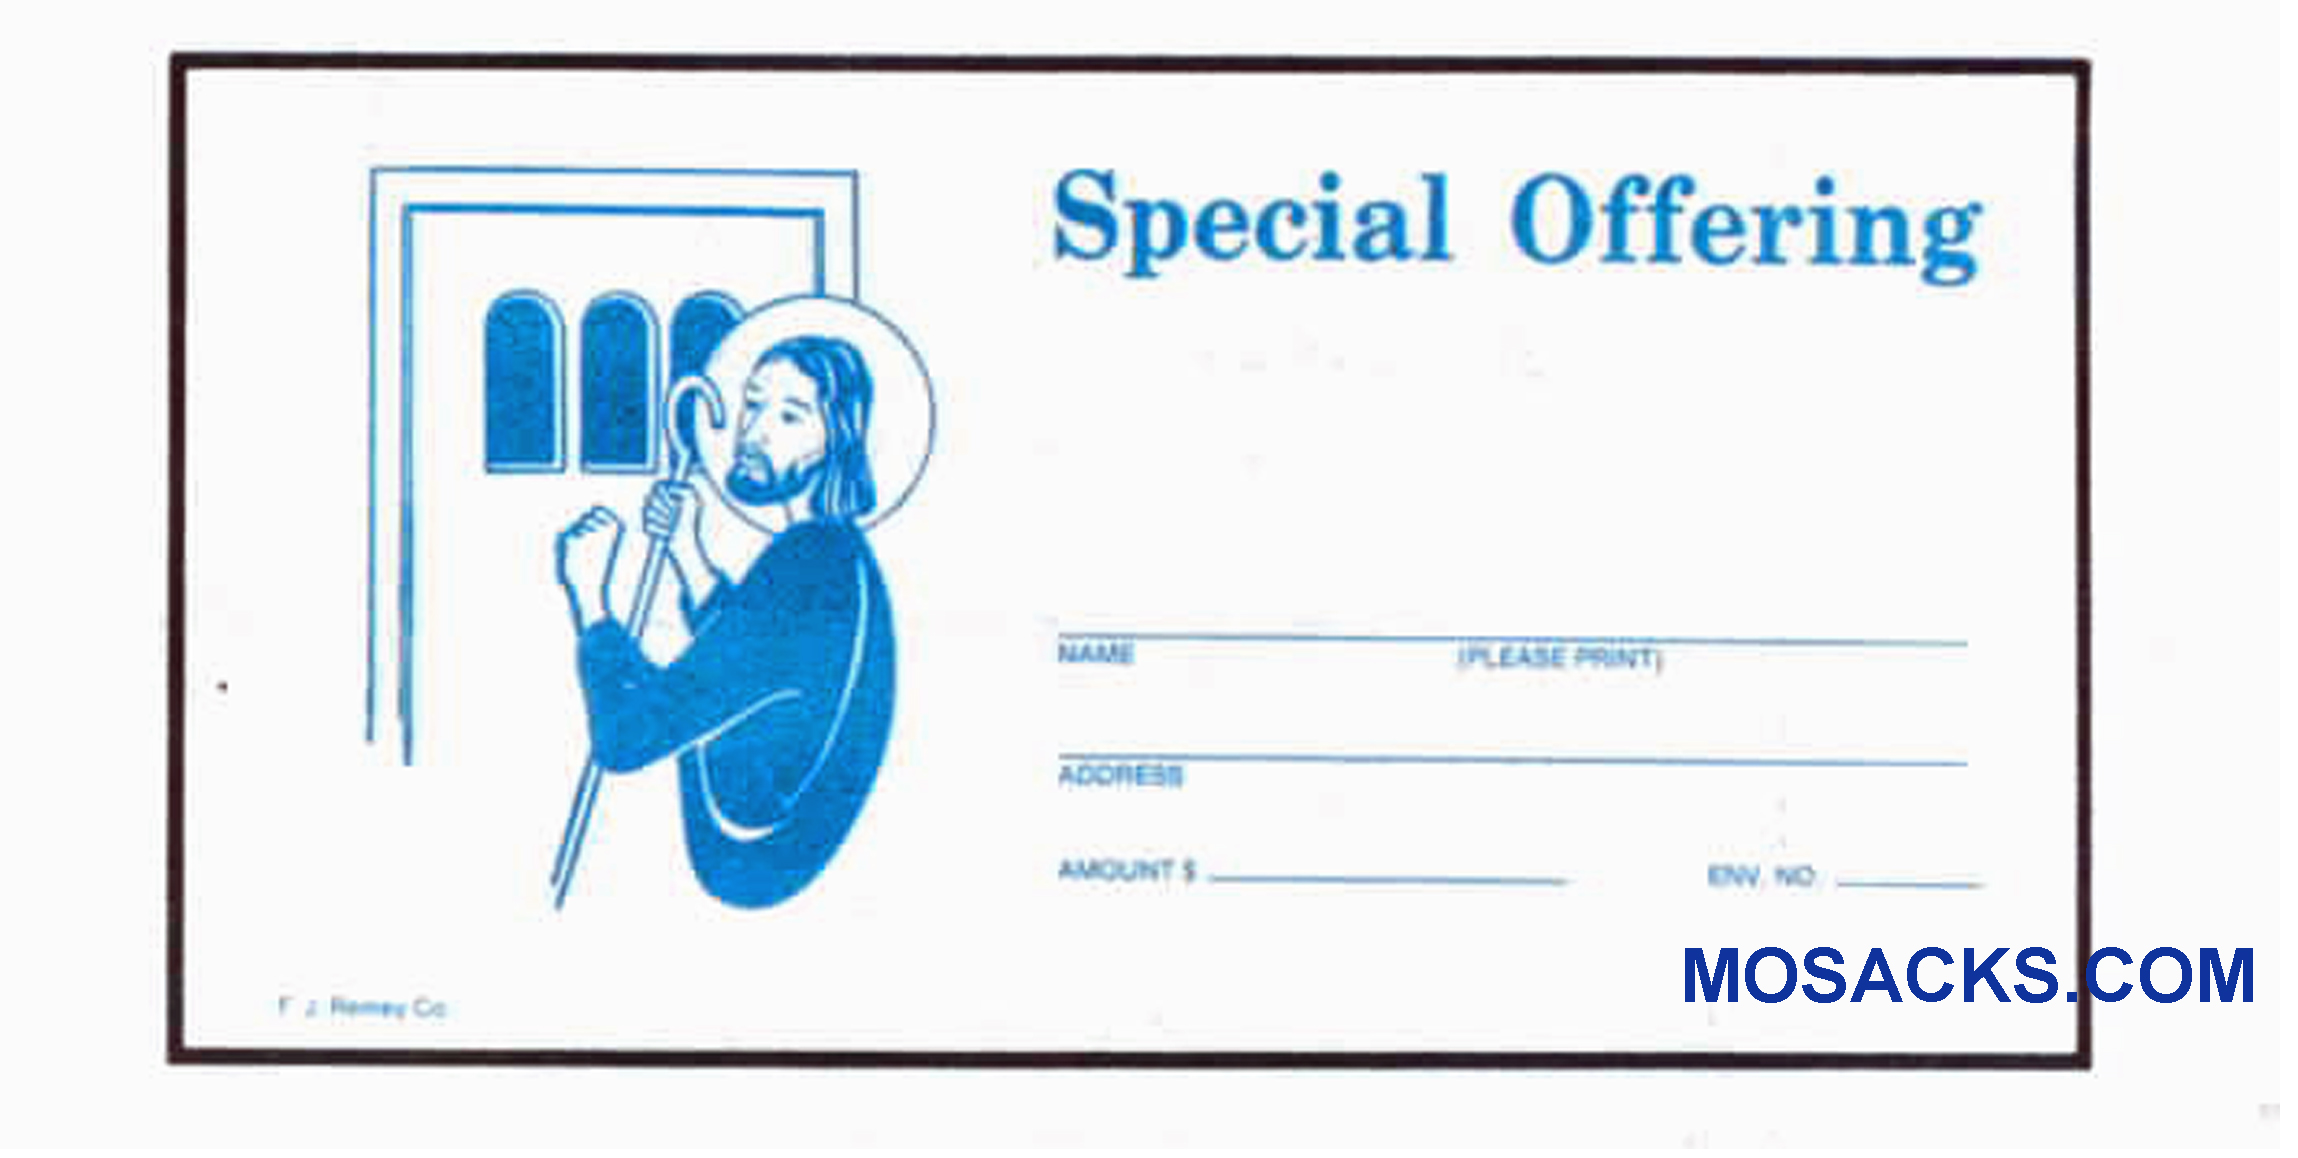 Special Offering - Church Offering Envelope 6-1/4 x 3-1/8 #304-378